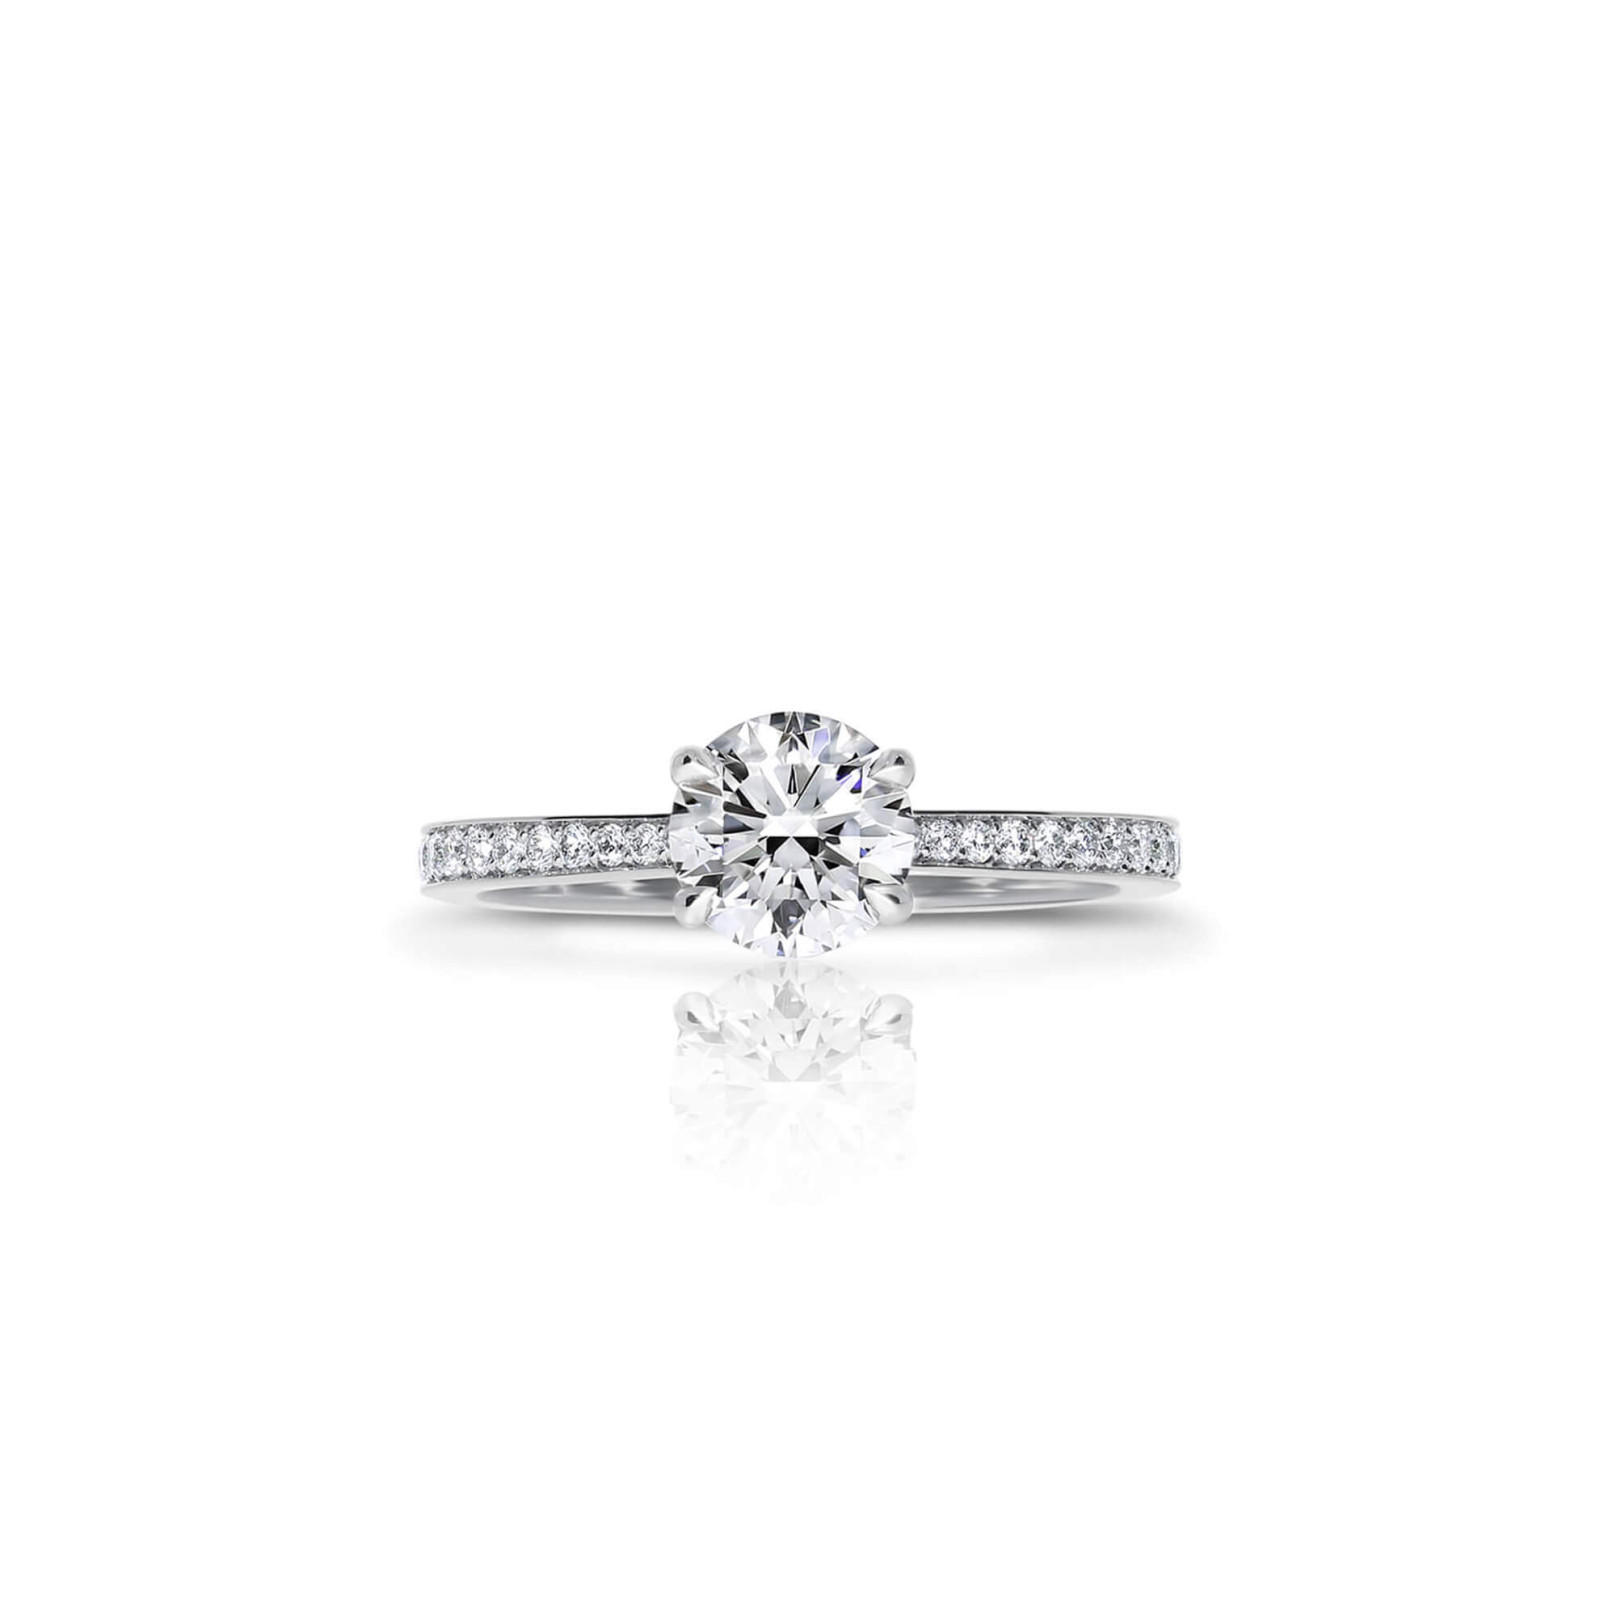 Four Claw Round Diamond Engagement Ring with Pavé Set Diamond Band